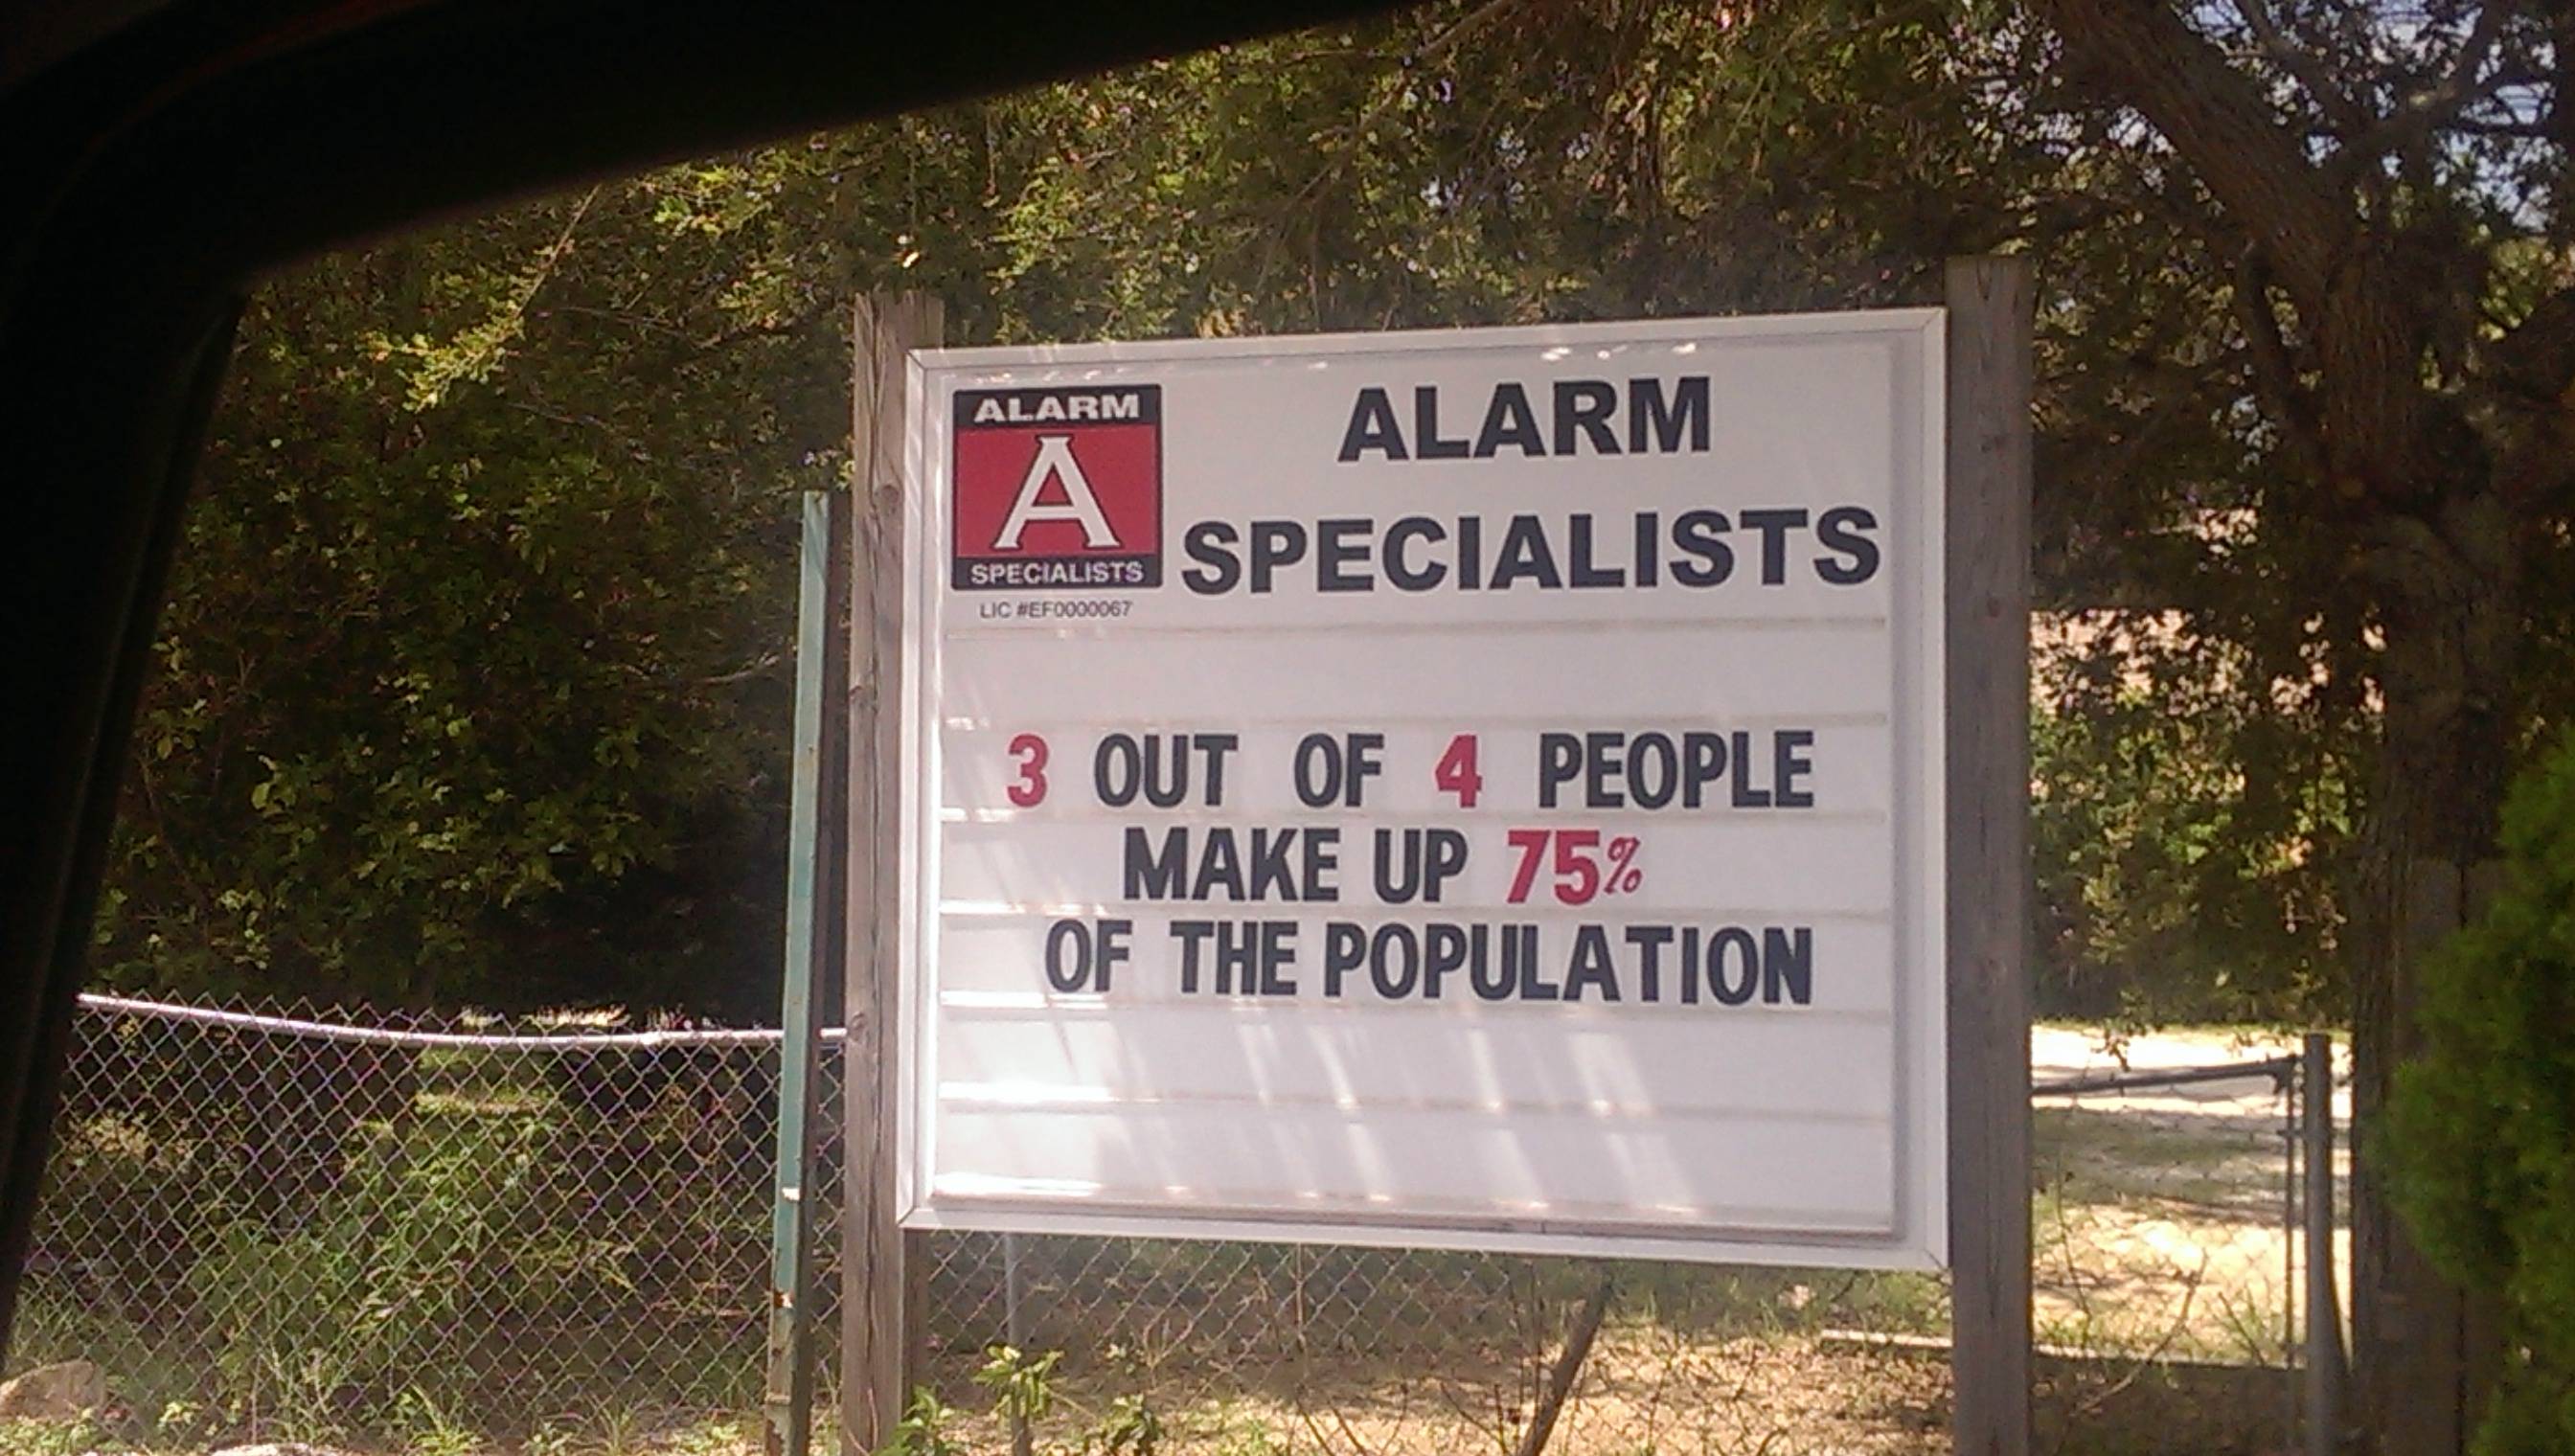 statistics cool funny - Alarm A Specialists 3 Out Of 4 People Make Up 75% Of The Population